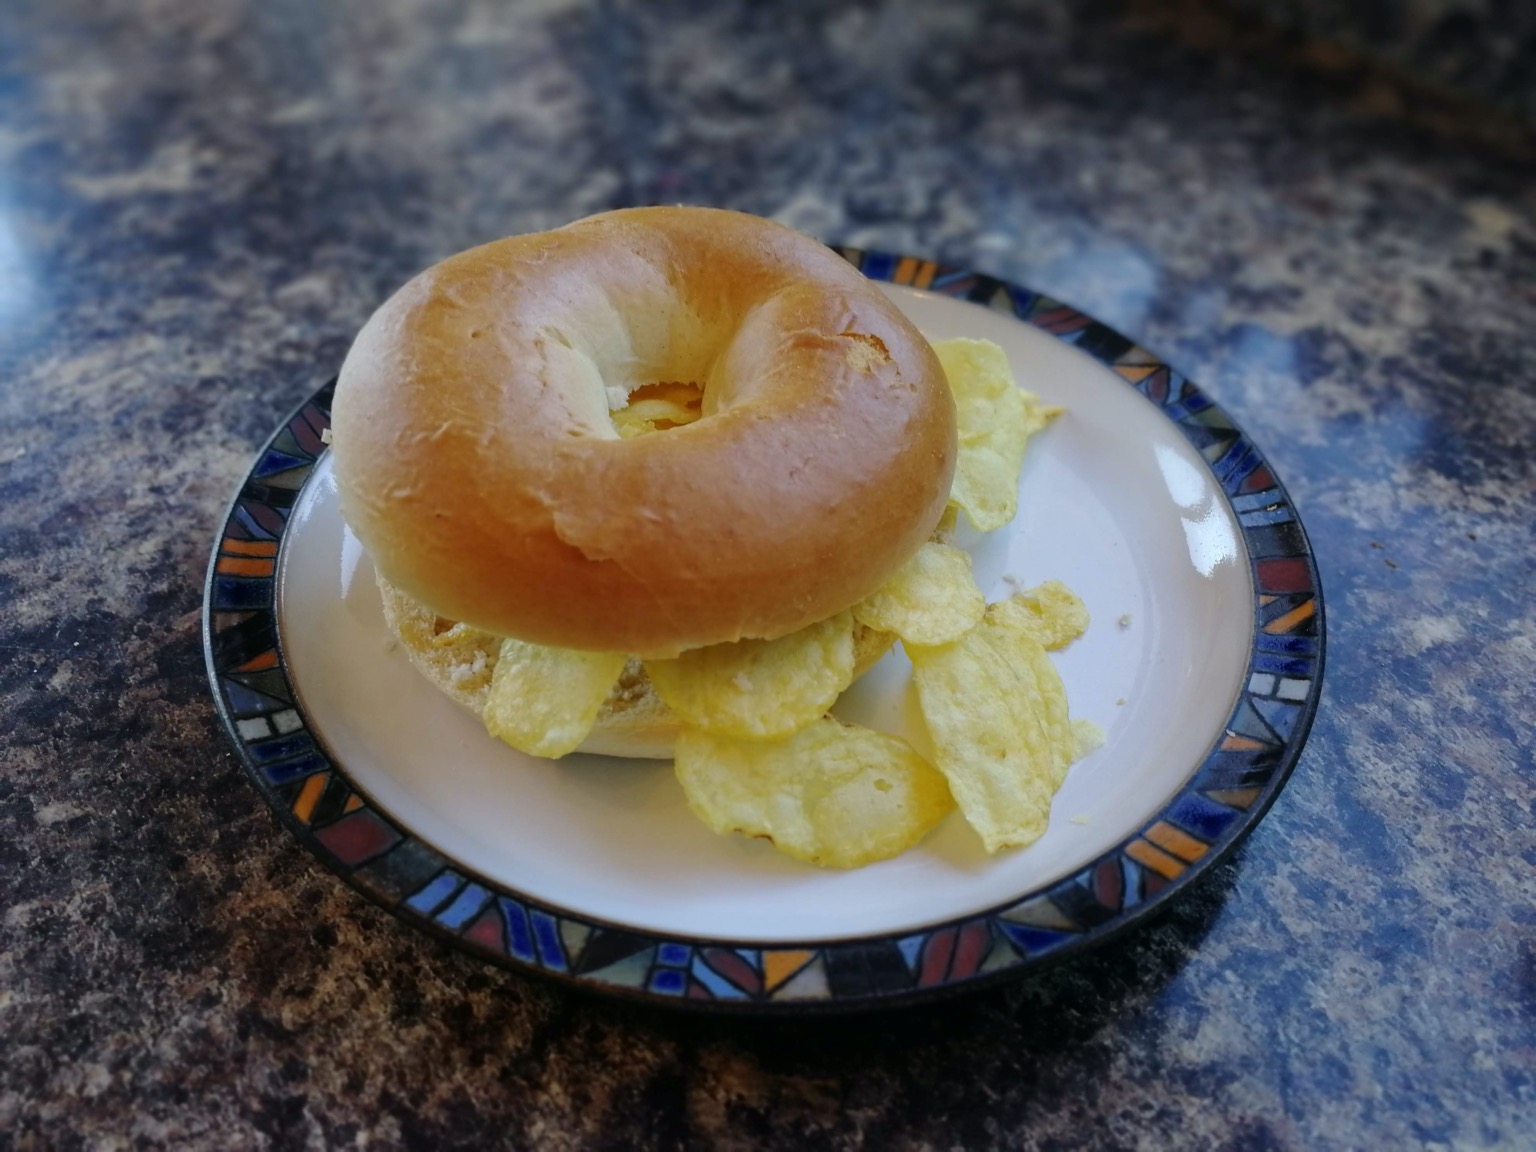 Bagel overfilled with potato crisps on a plate